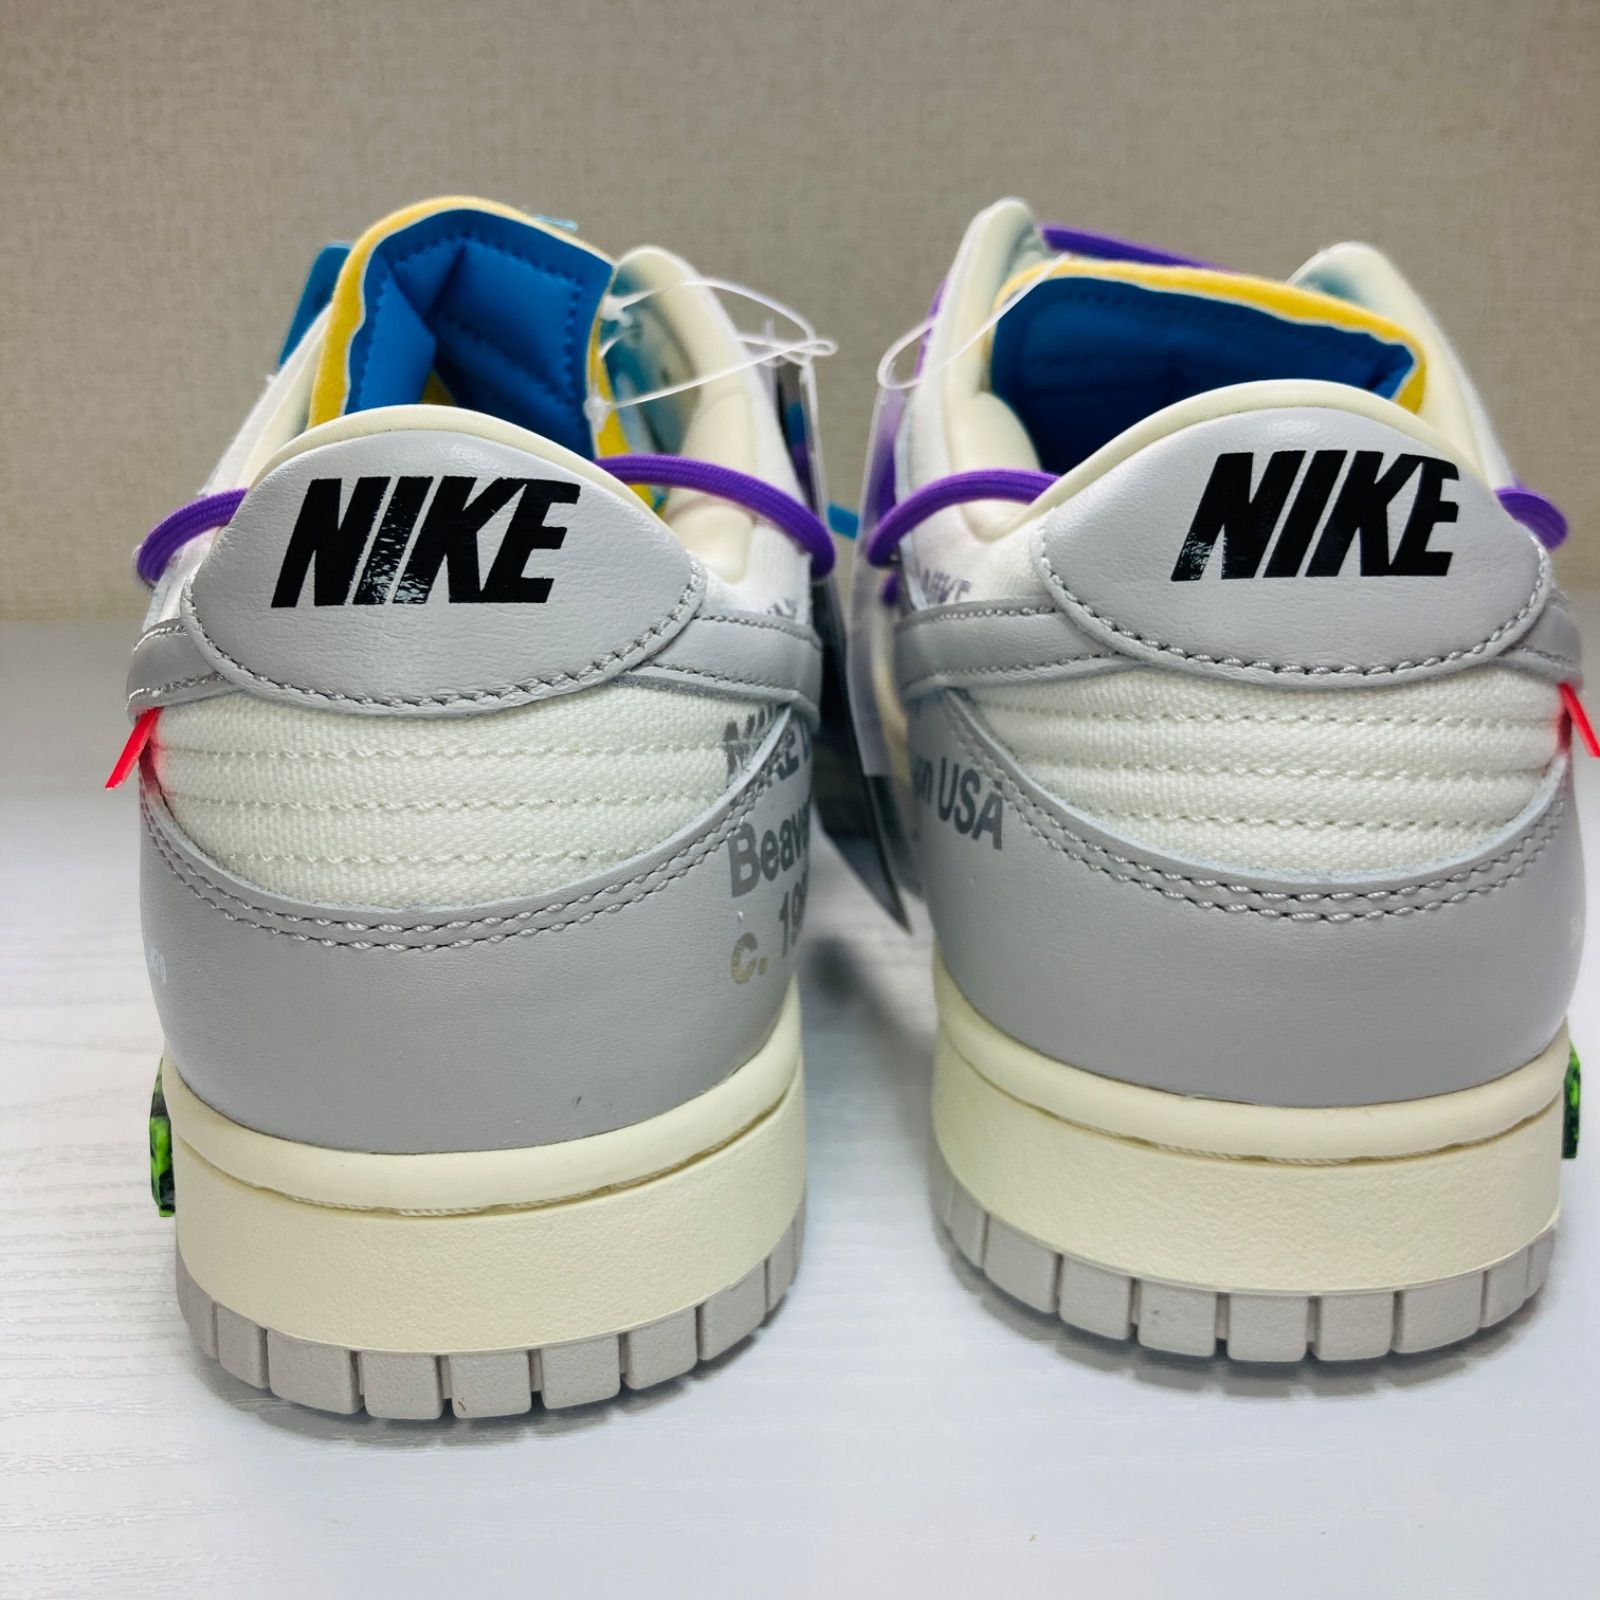 OFF-WHITE Nike Dunk Low 1 of 50 “47” 【フォロー10%OFF】